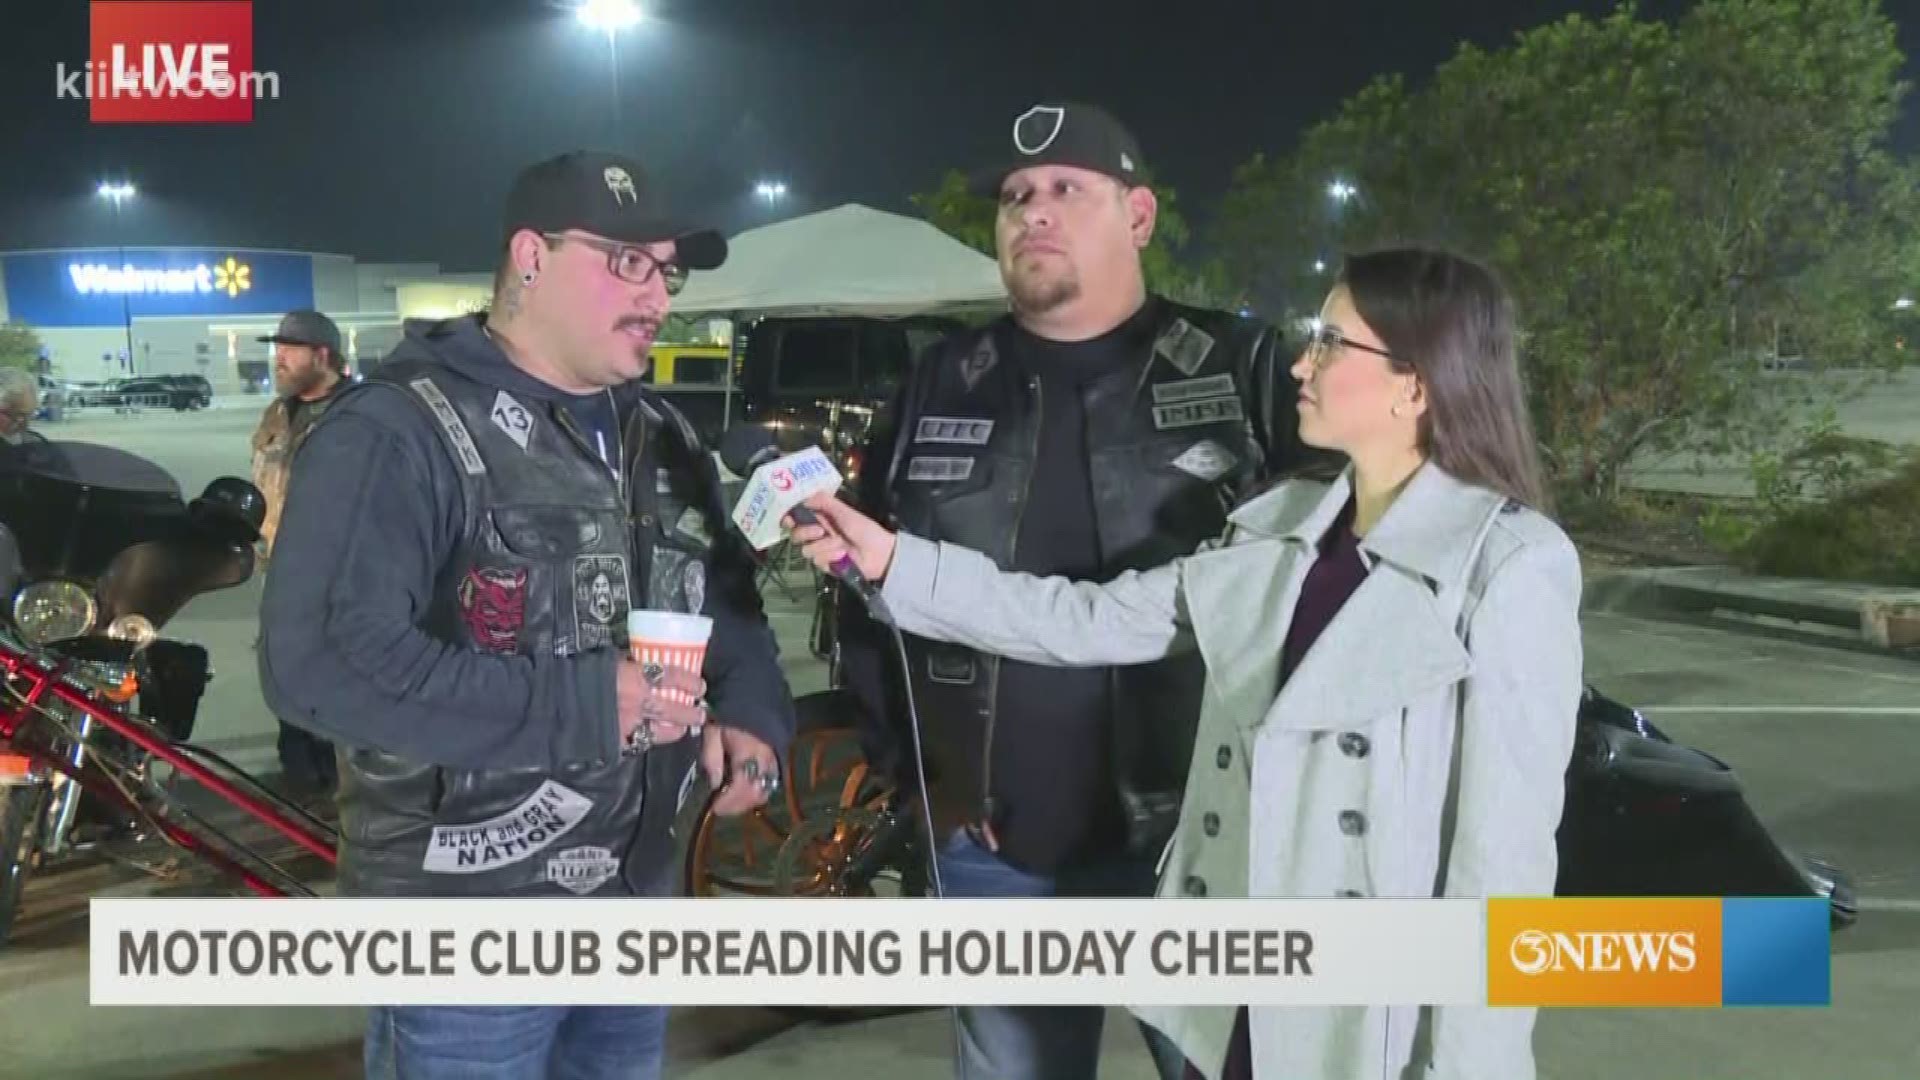 The family Motorcycle Club will set up on Black-Friday weekend